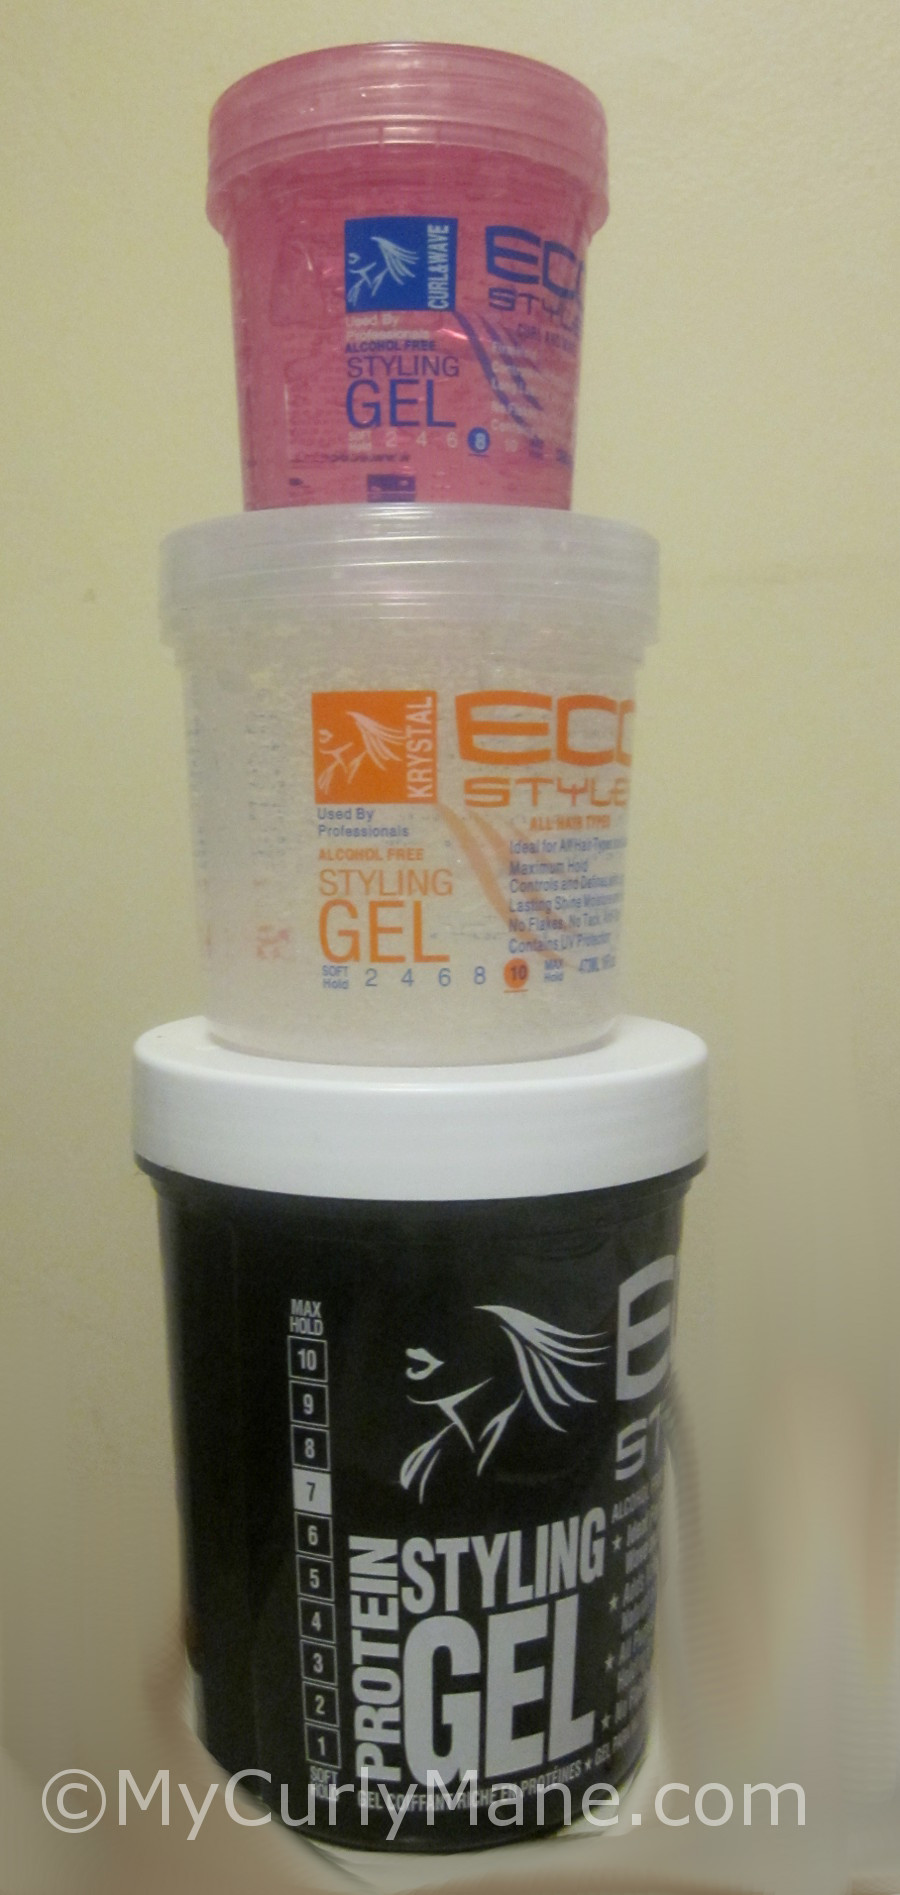 Product Review: Eco Styler Gels | My Curly Mane - Natural Hair Care Blog,  Tips, and Inspiration